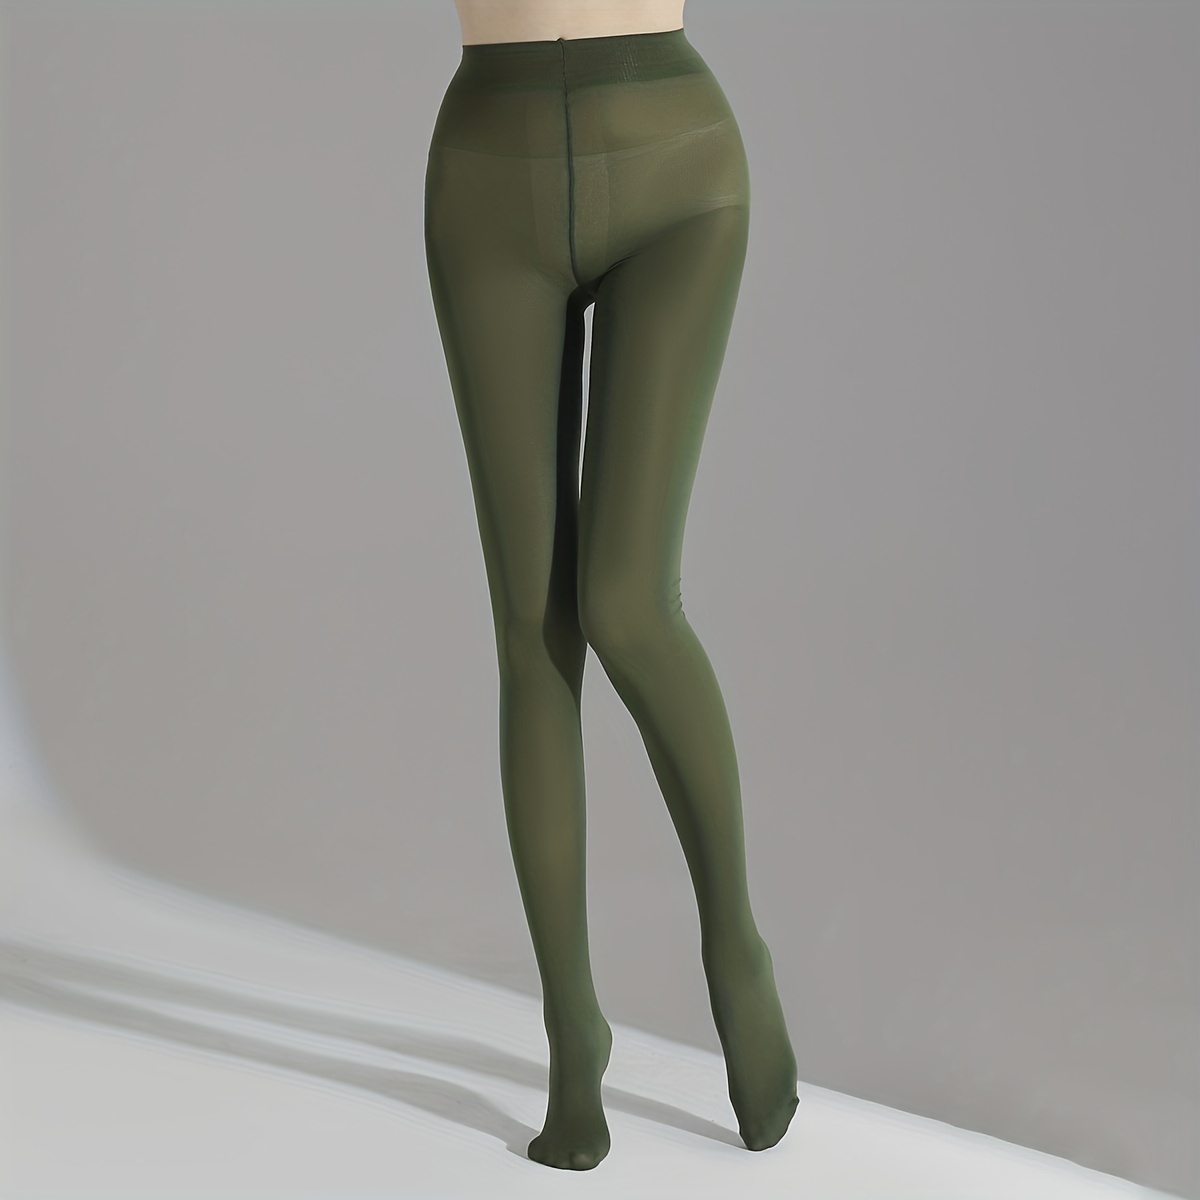 Green Tights and pantyhose for Women